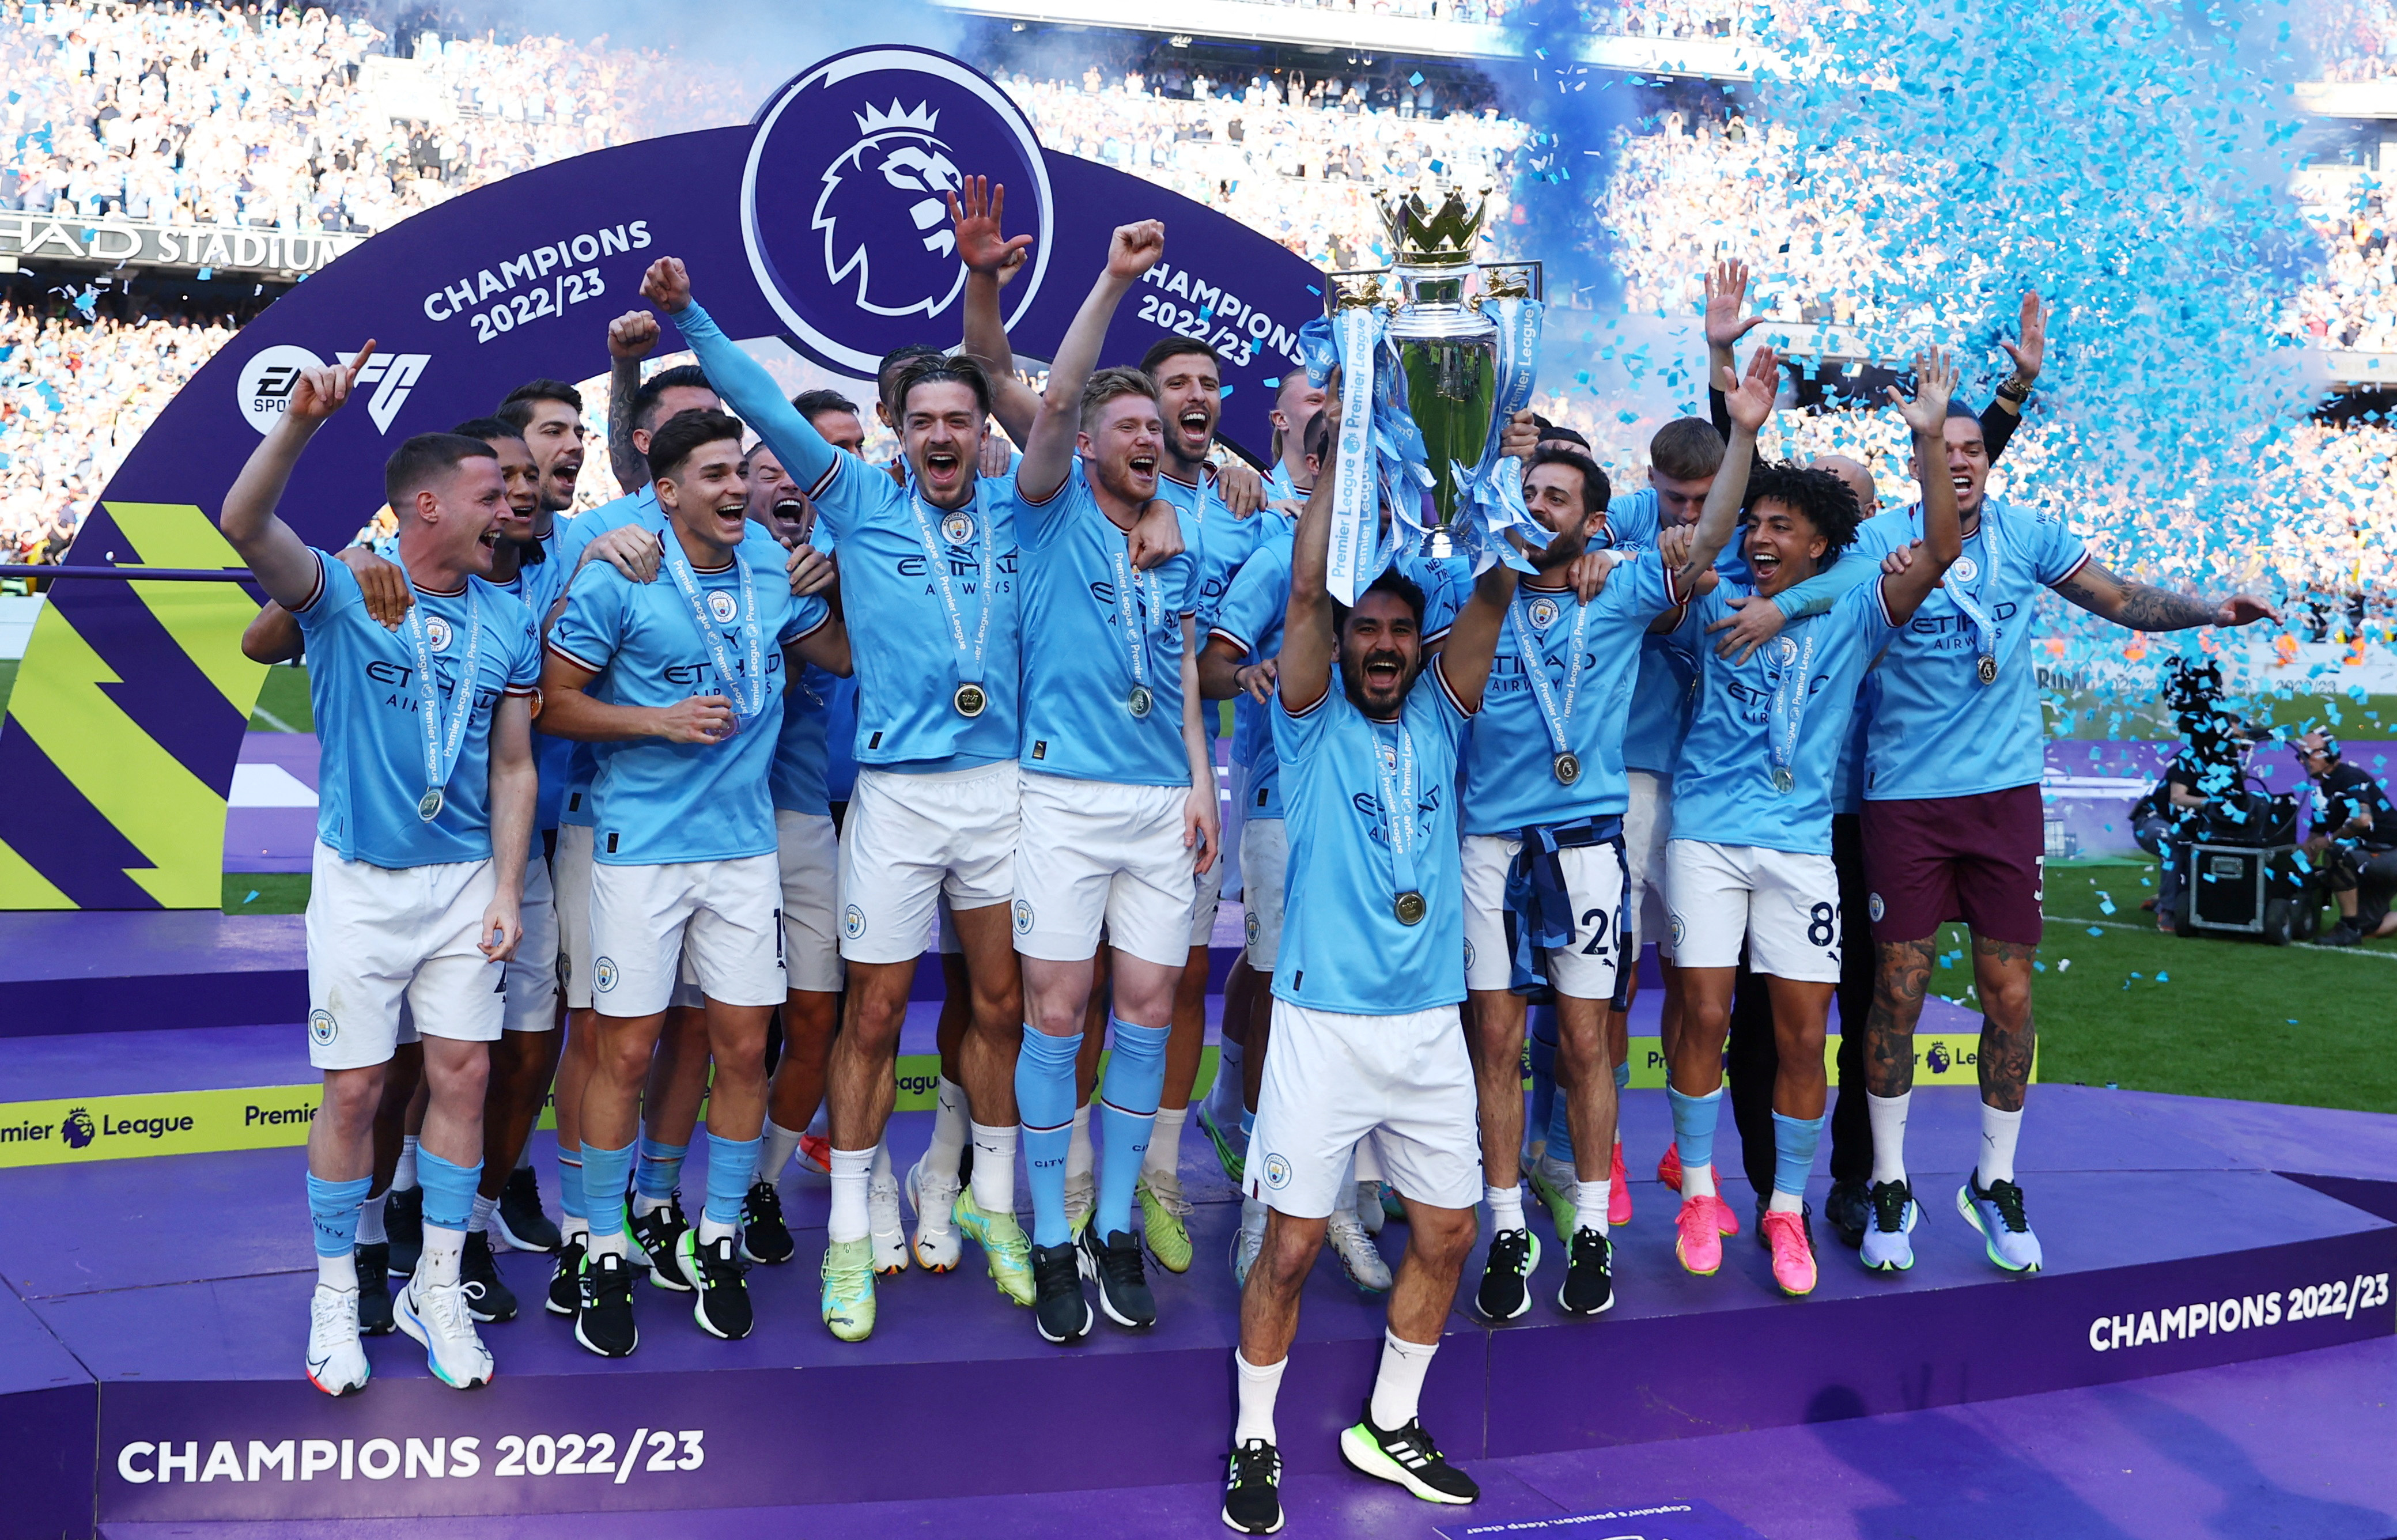 MANCHESTER CITY NAMED WORLD'S MOST VALUABLE FOOTBALL CLUB BRAND